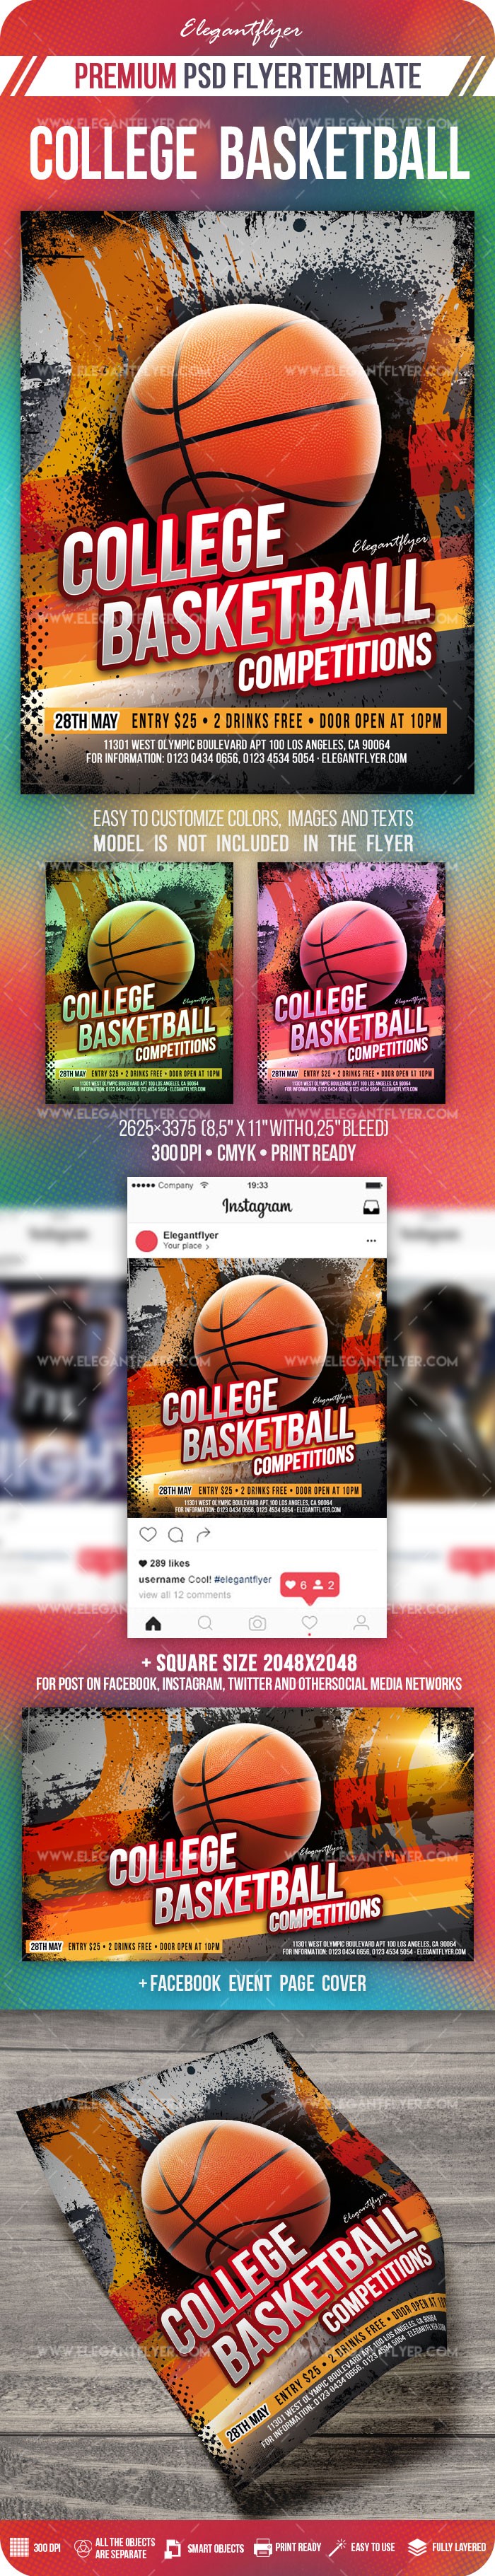 College Basketball Competitions by ElegantFlyer